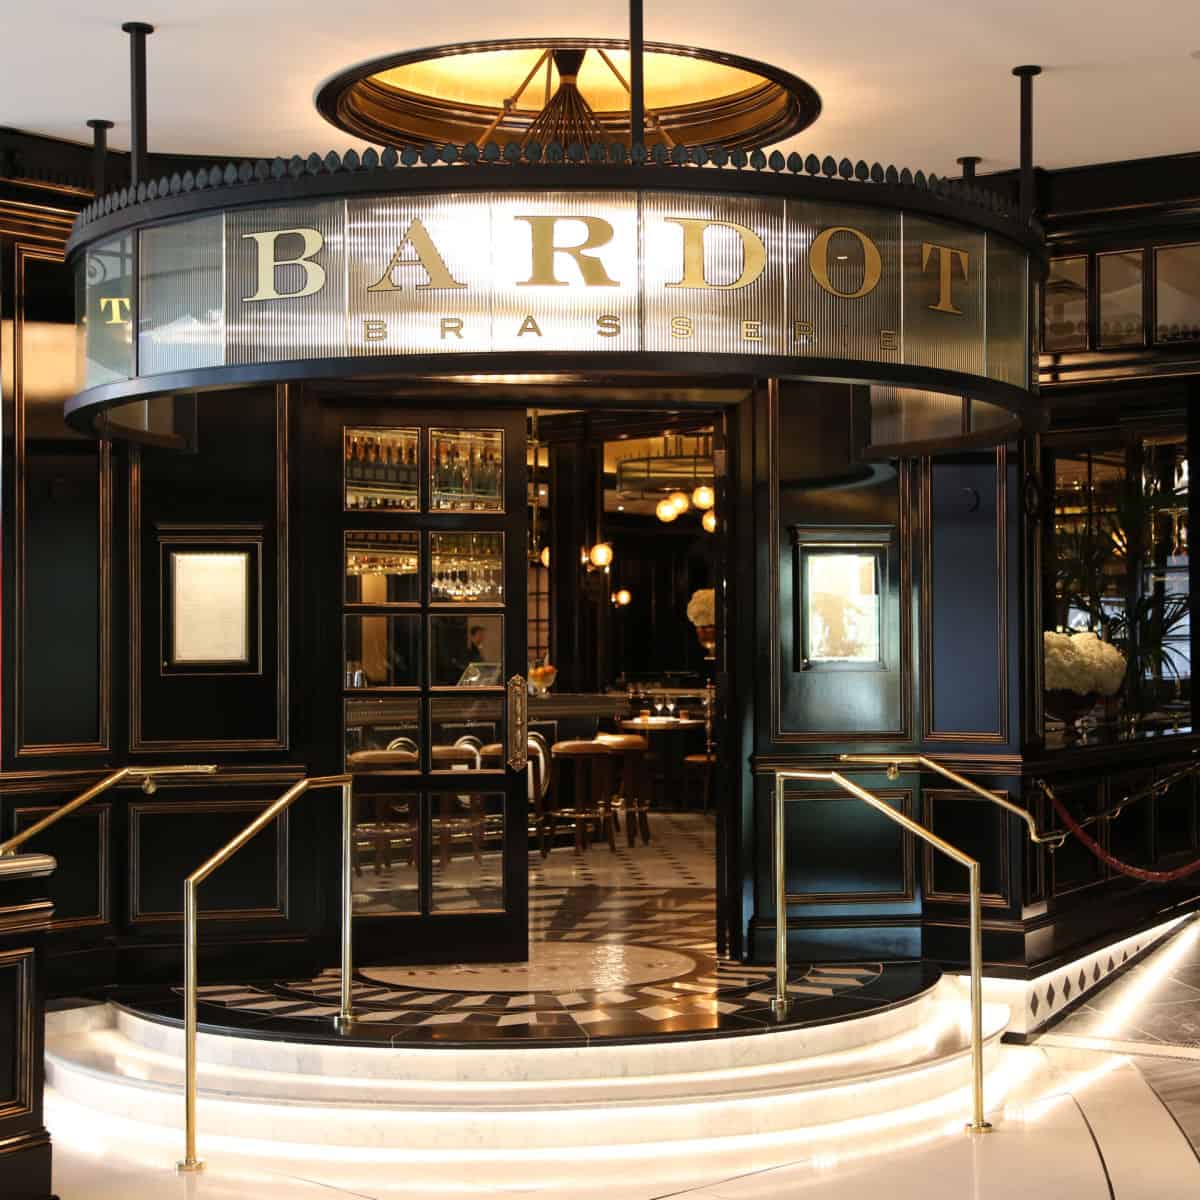 Entrance to Bardot Brasserie with marble stairs